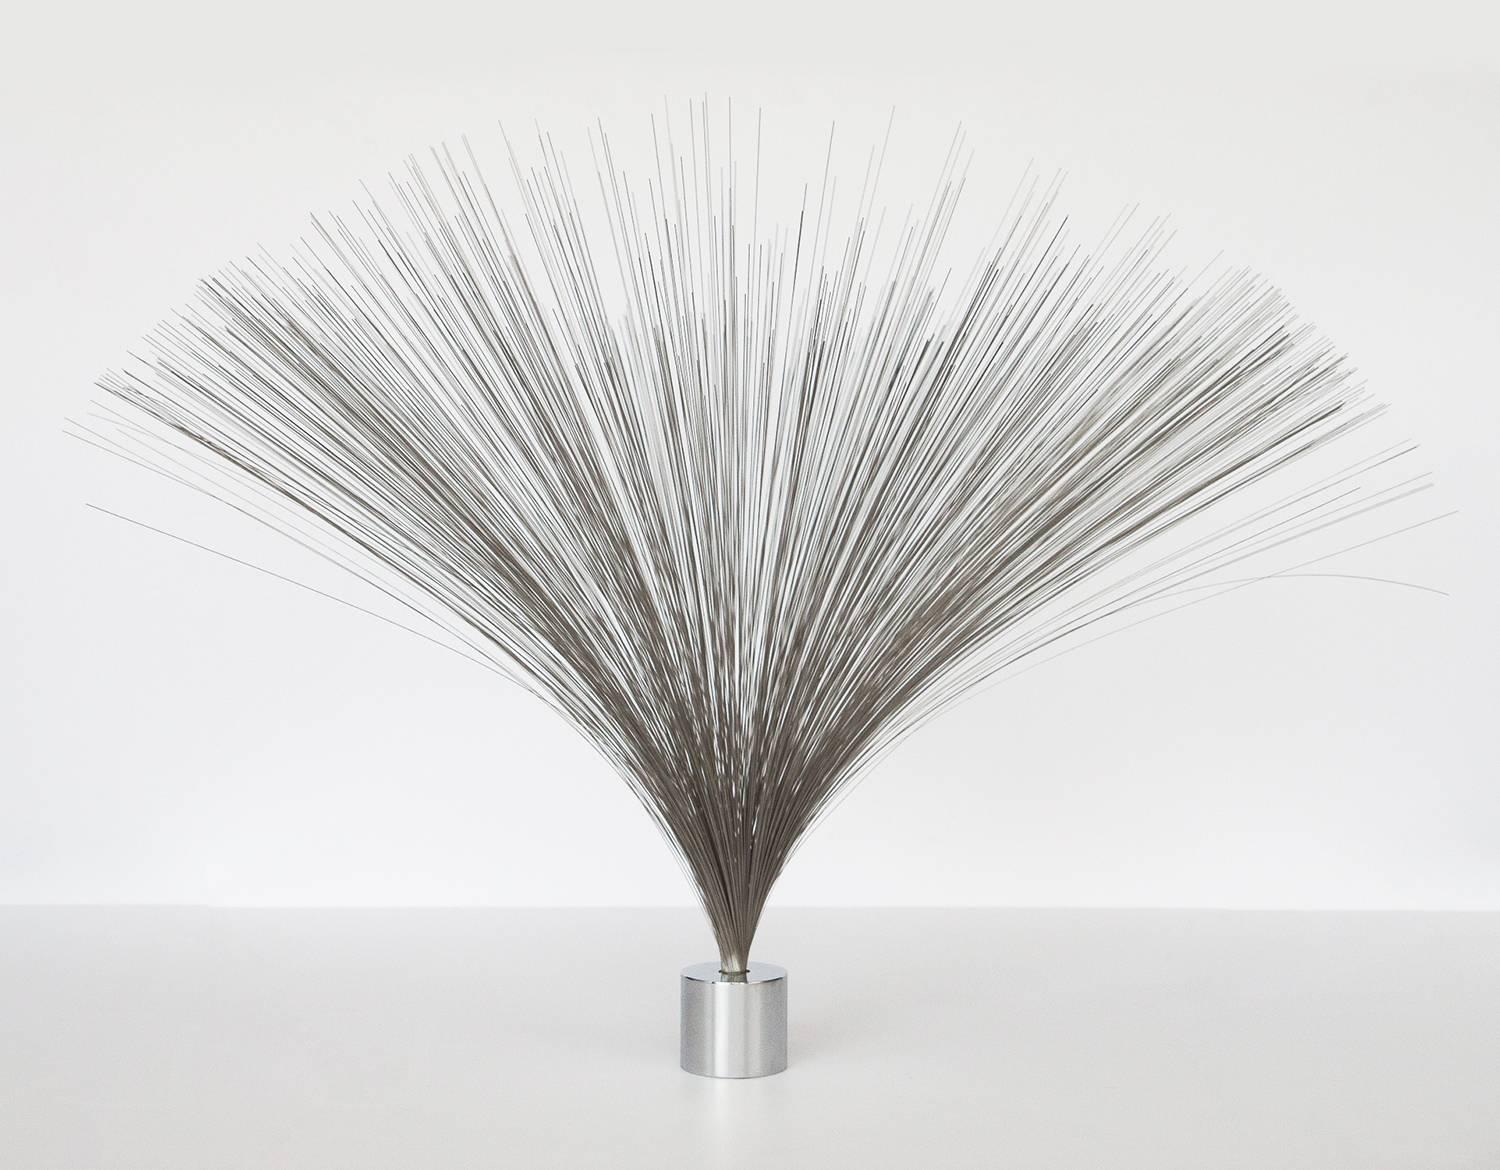 Inspired by the form made famous by Harry Bertoia, this spray-shaped Kinetic sculpture is made of hundreds of Fine steel wires gathered within a heavy chrome plated steel cylinder base. The piece is marked with a label on the bottom of the base. A